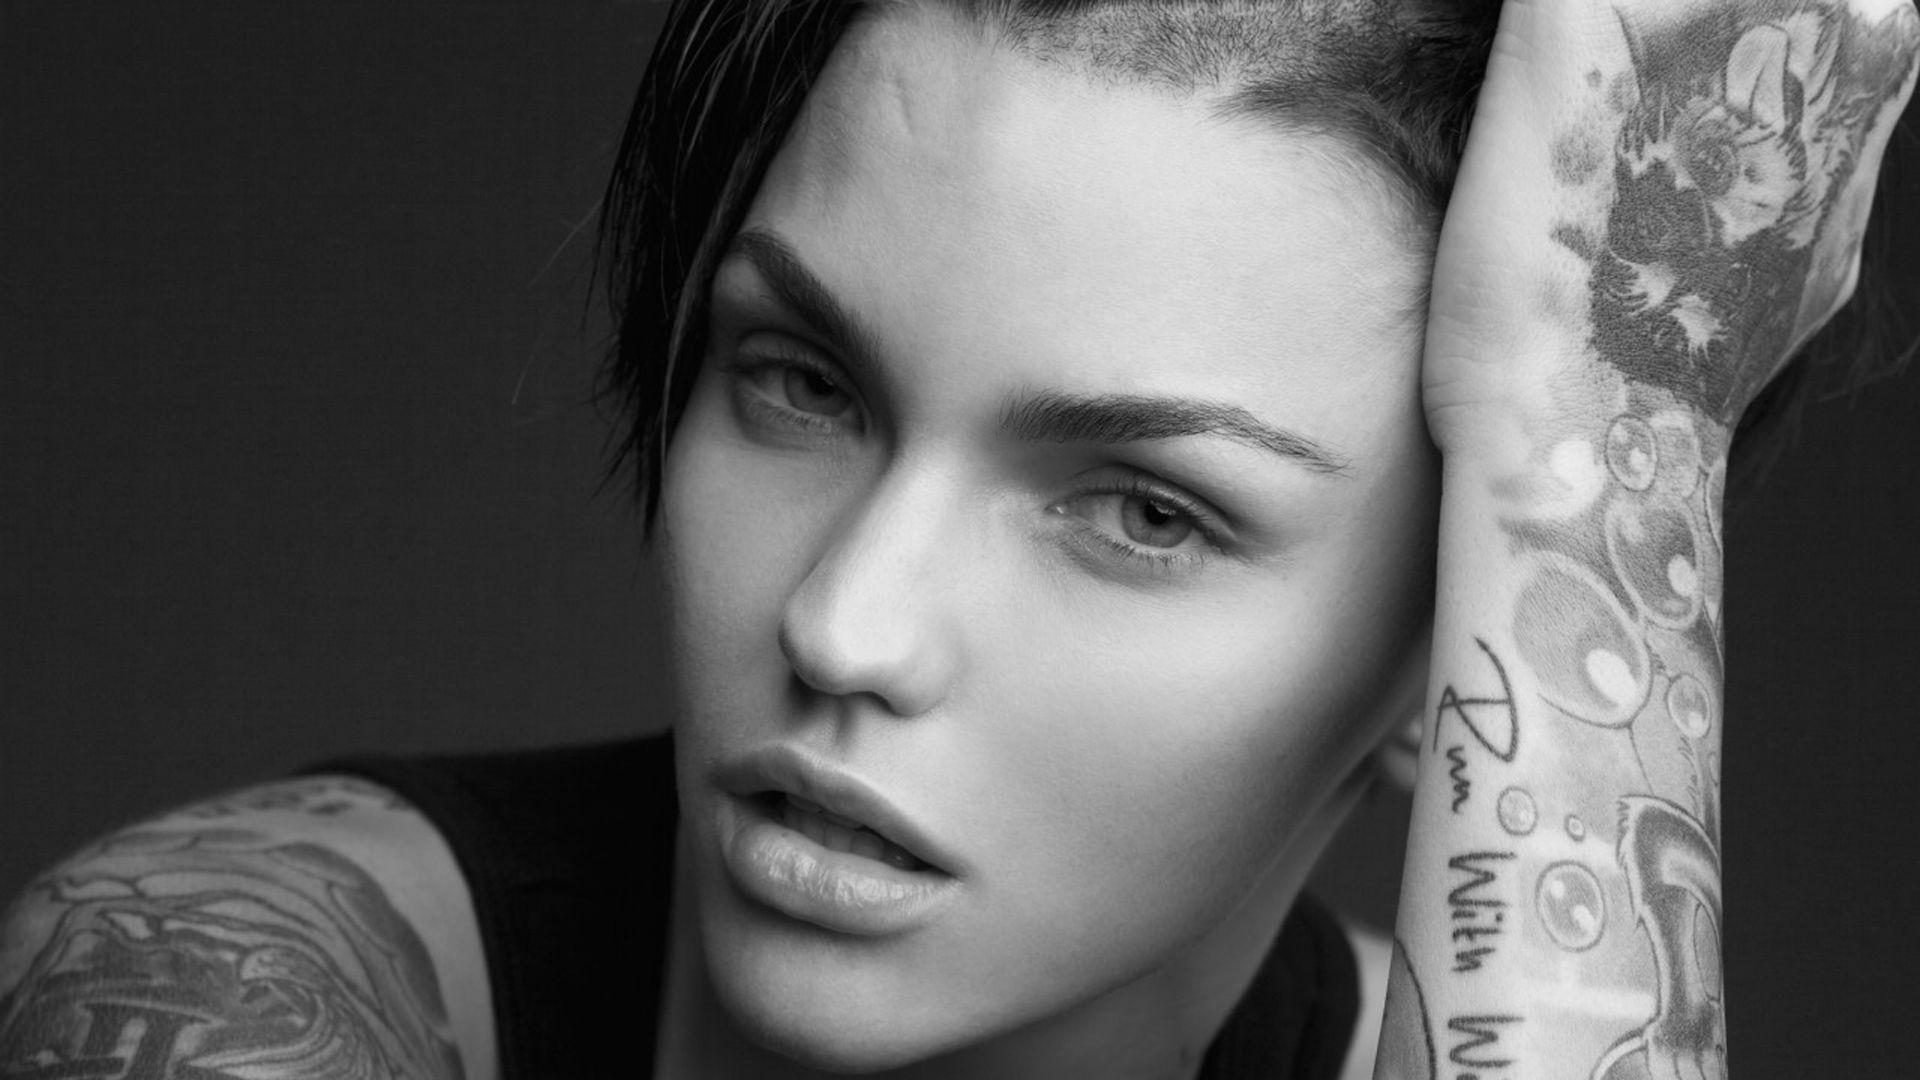 Ruby Rose Wallpaper Image Photo Picture Background